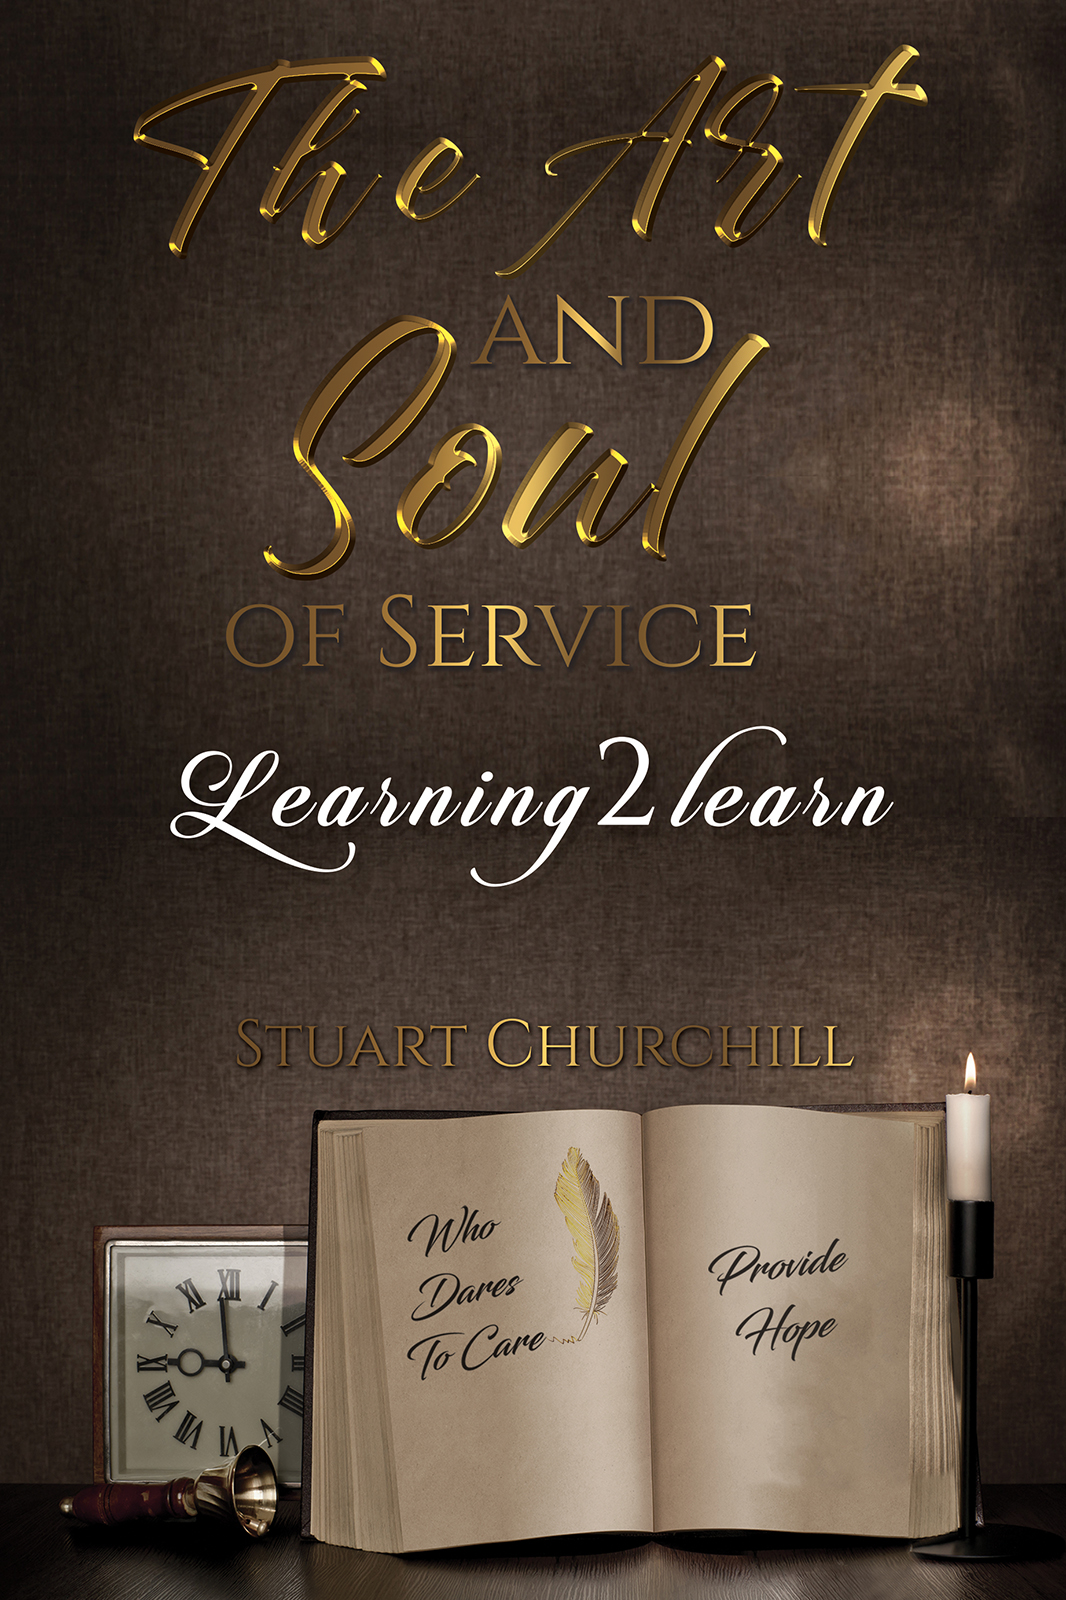 This image is the cover for the book The Art and Soul of Service